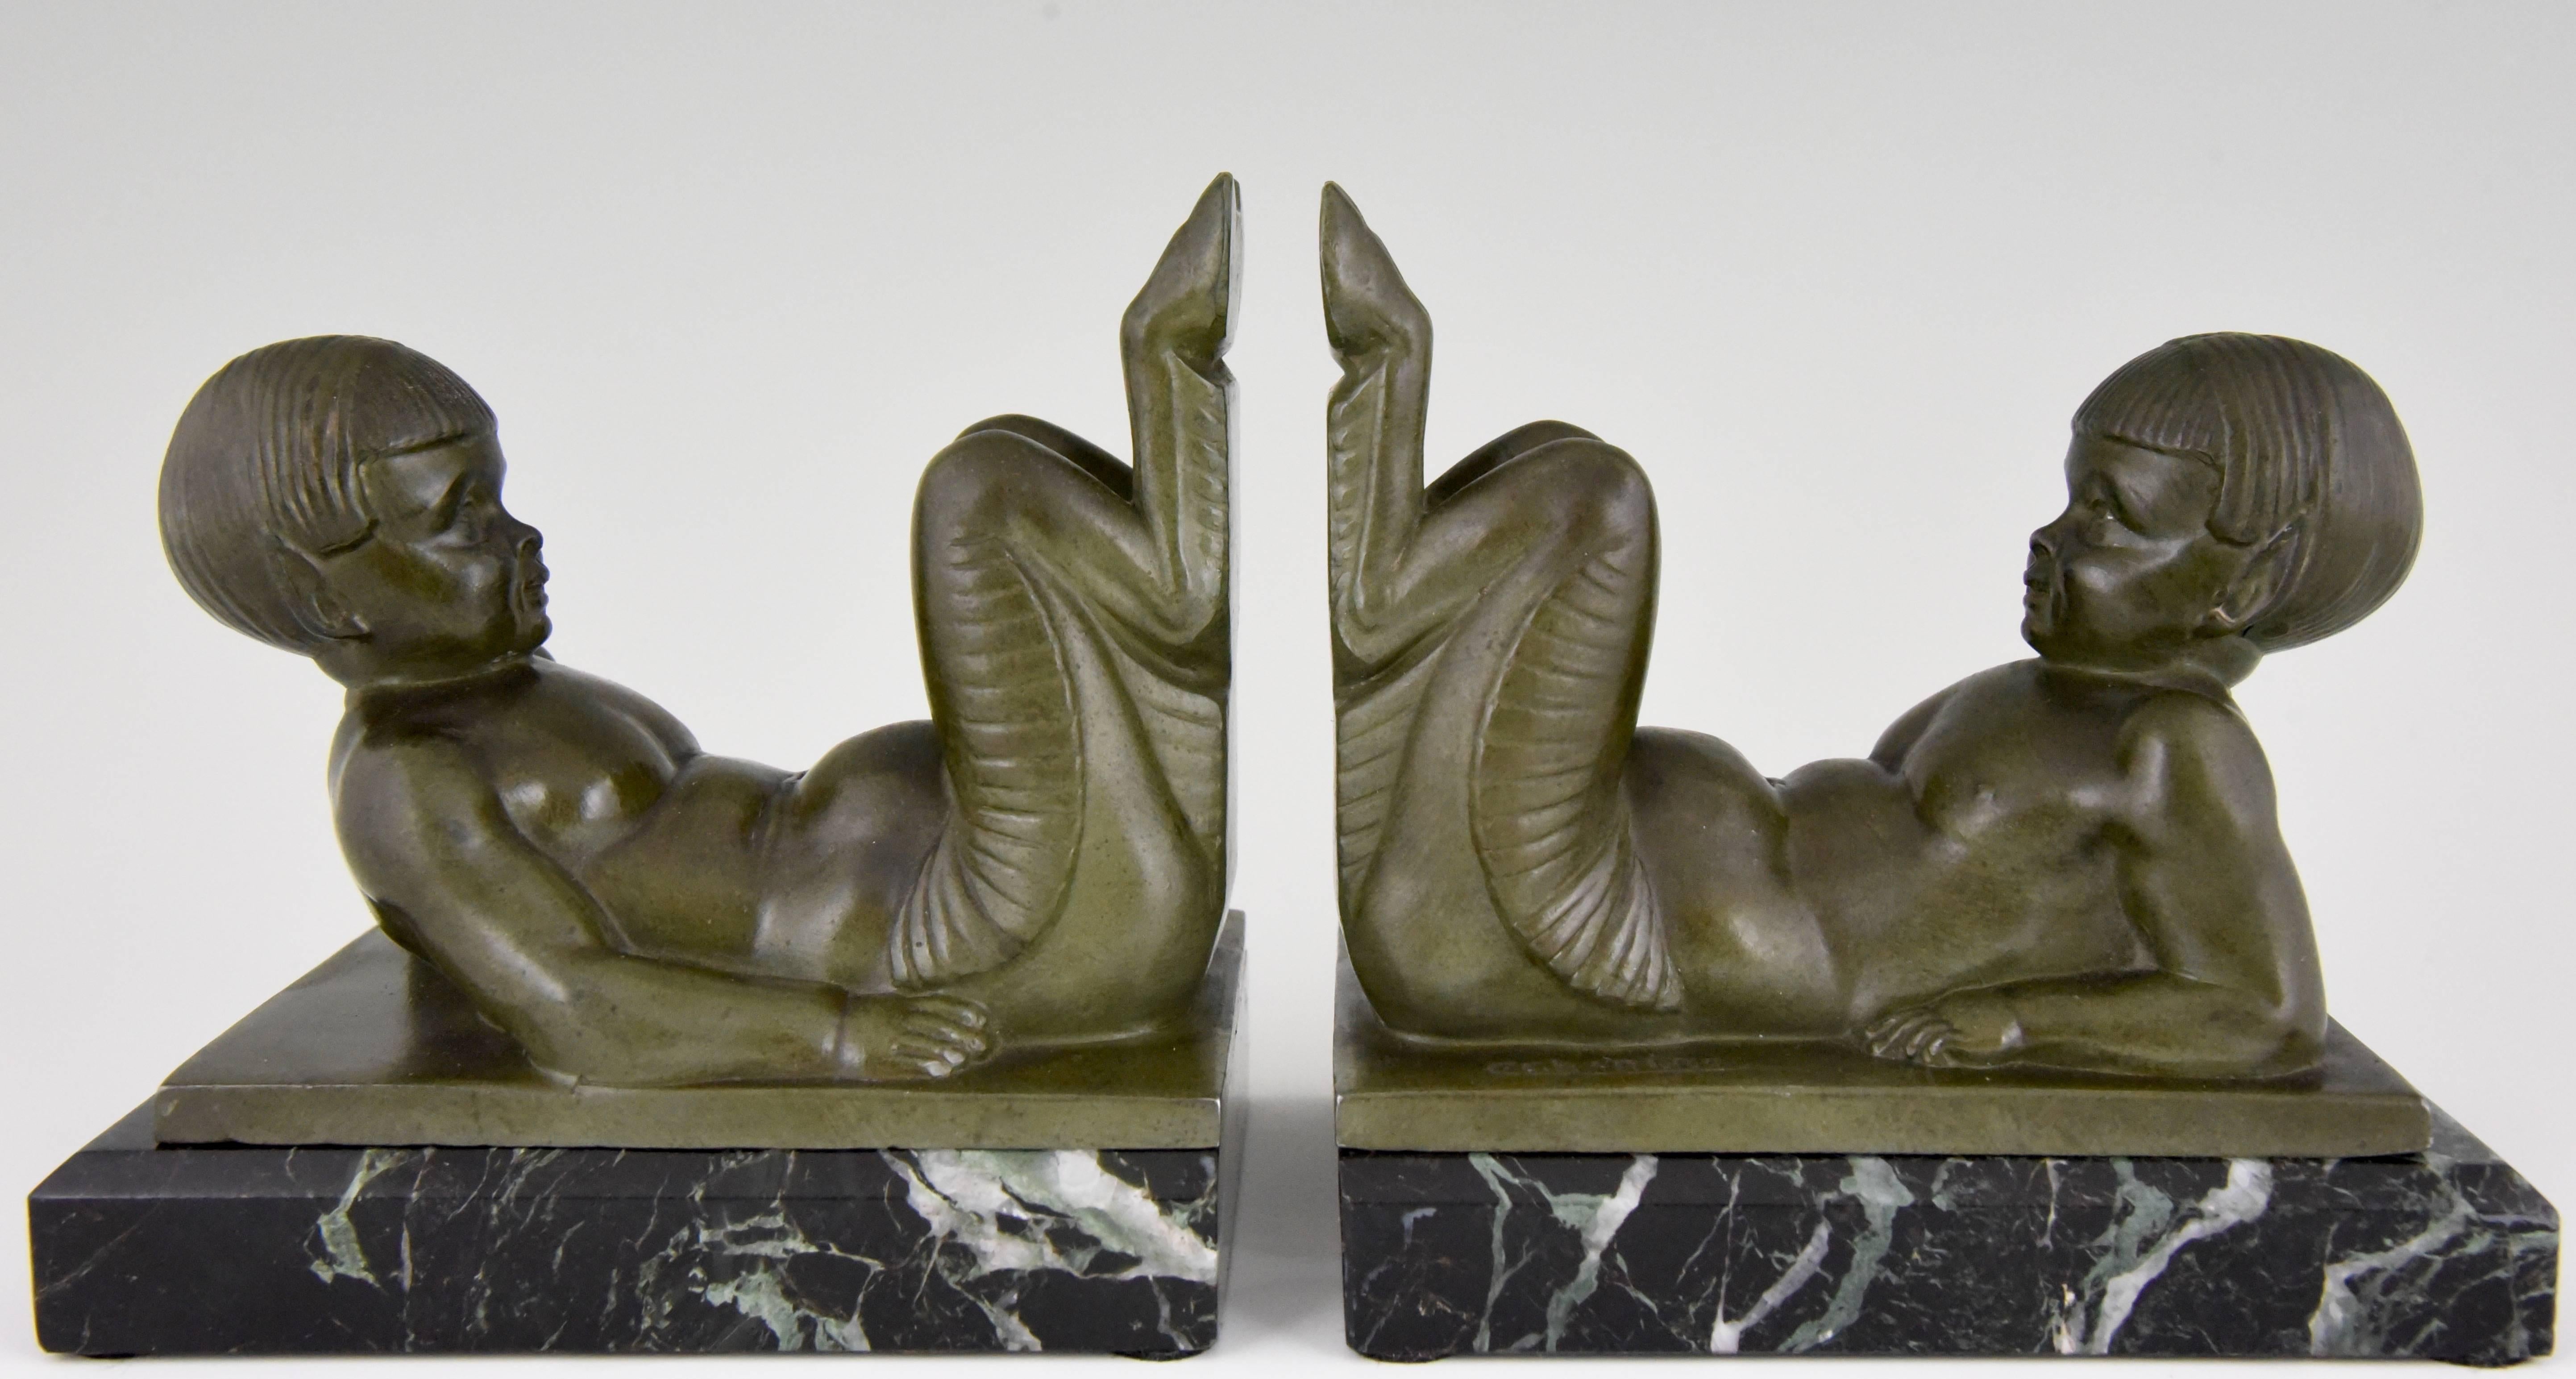 Description: Art Deco bookends with young satyrs. 
Artist / Maker: Charles Charles.
Signature / Marks: C. Charles.
Style: Art Deco. 
Date: circa 1930.
Material: Art metal with green patina on green marble base. 
Origin: France. 
Size of